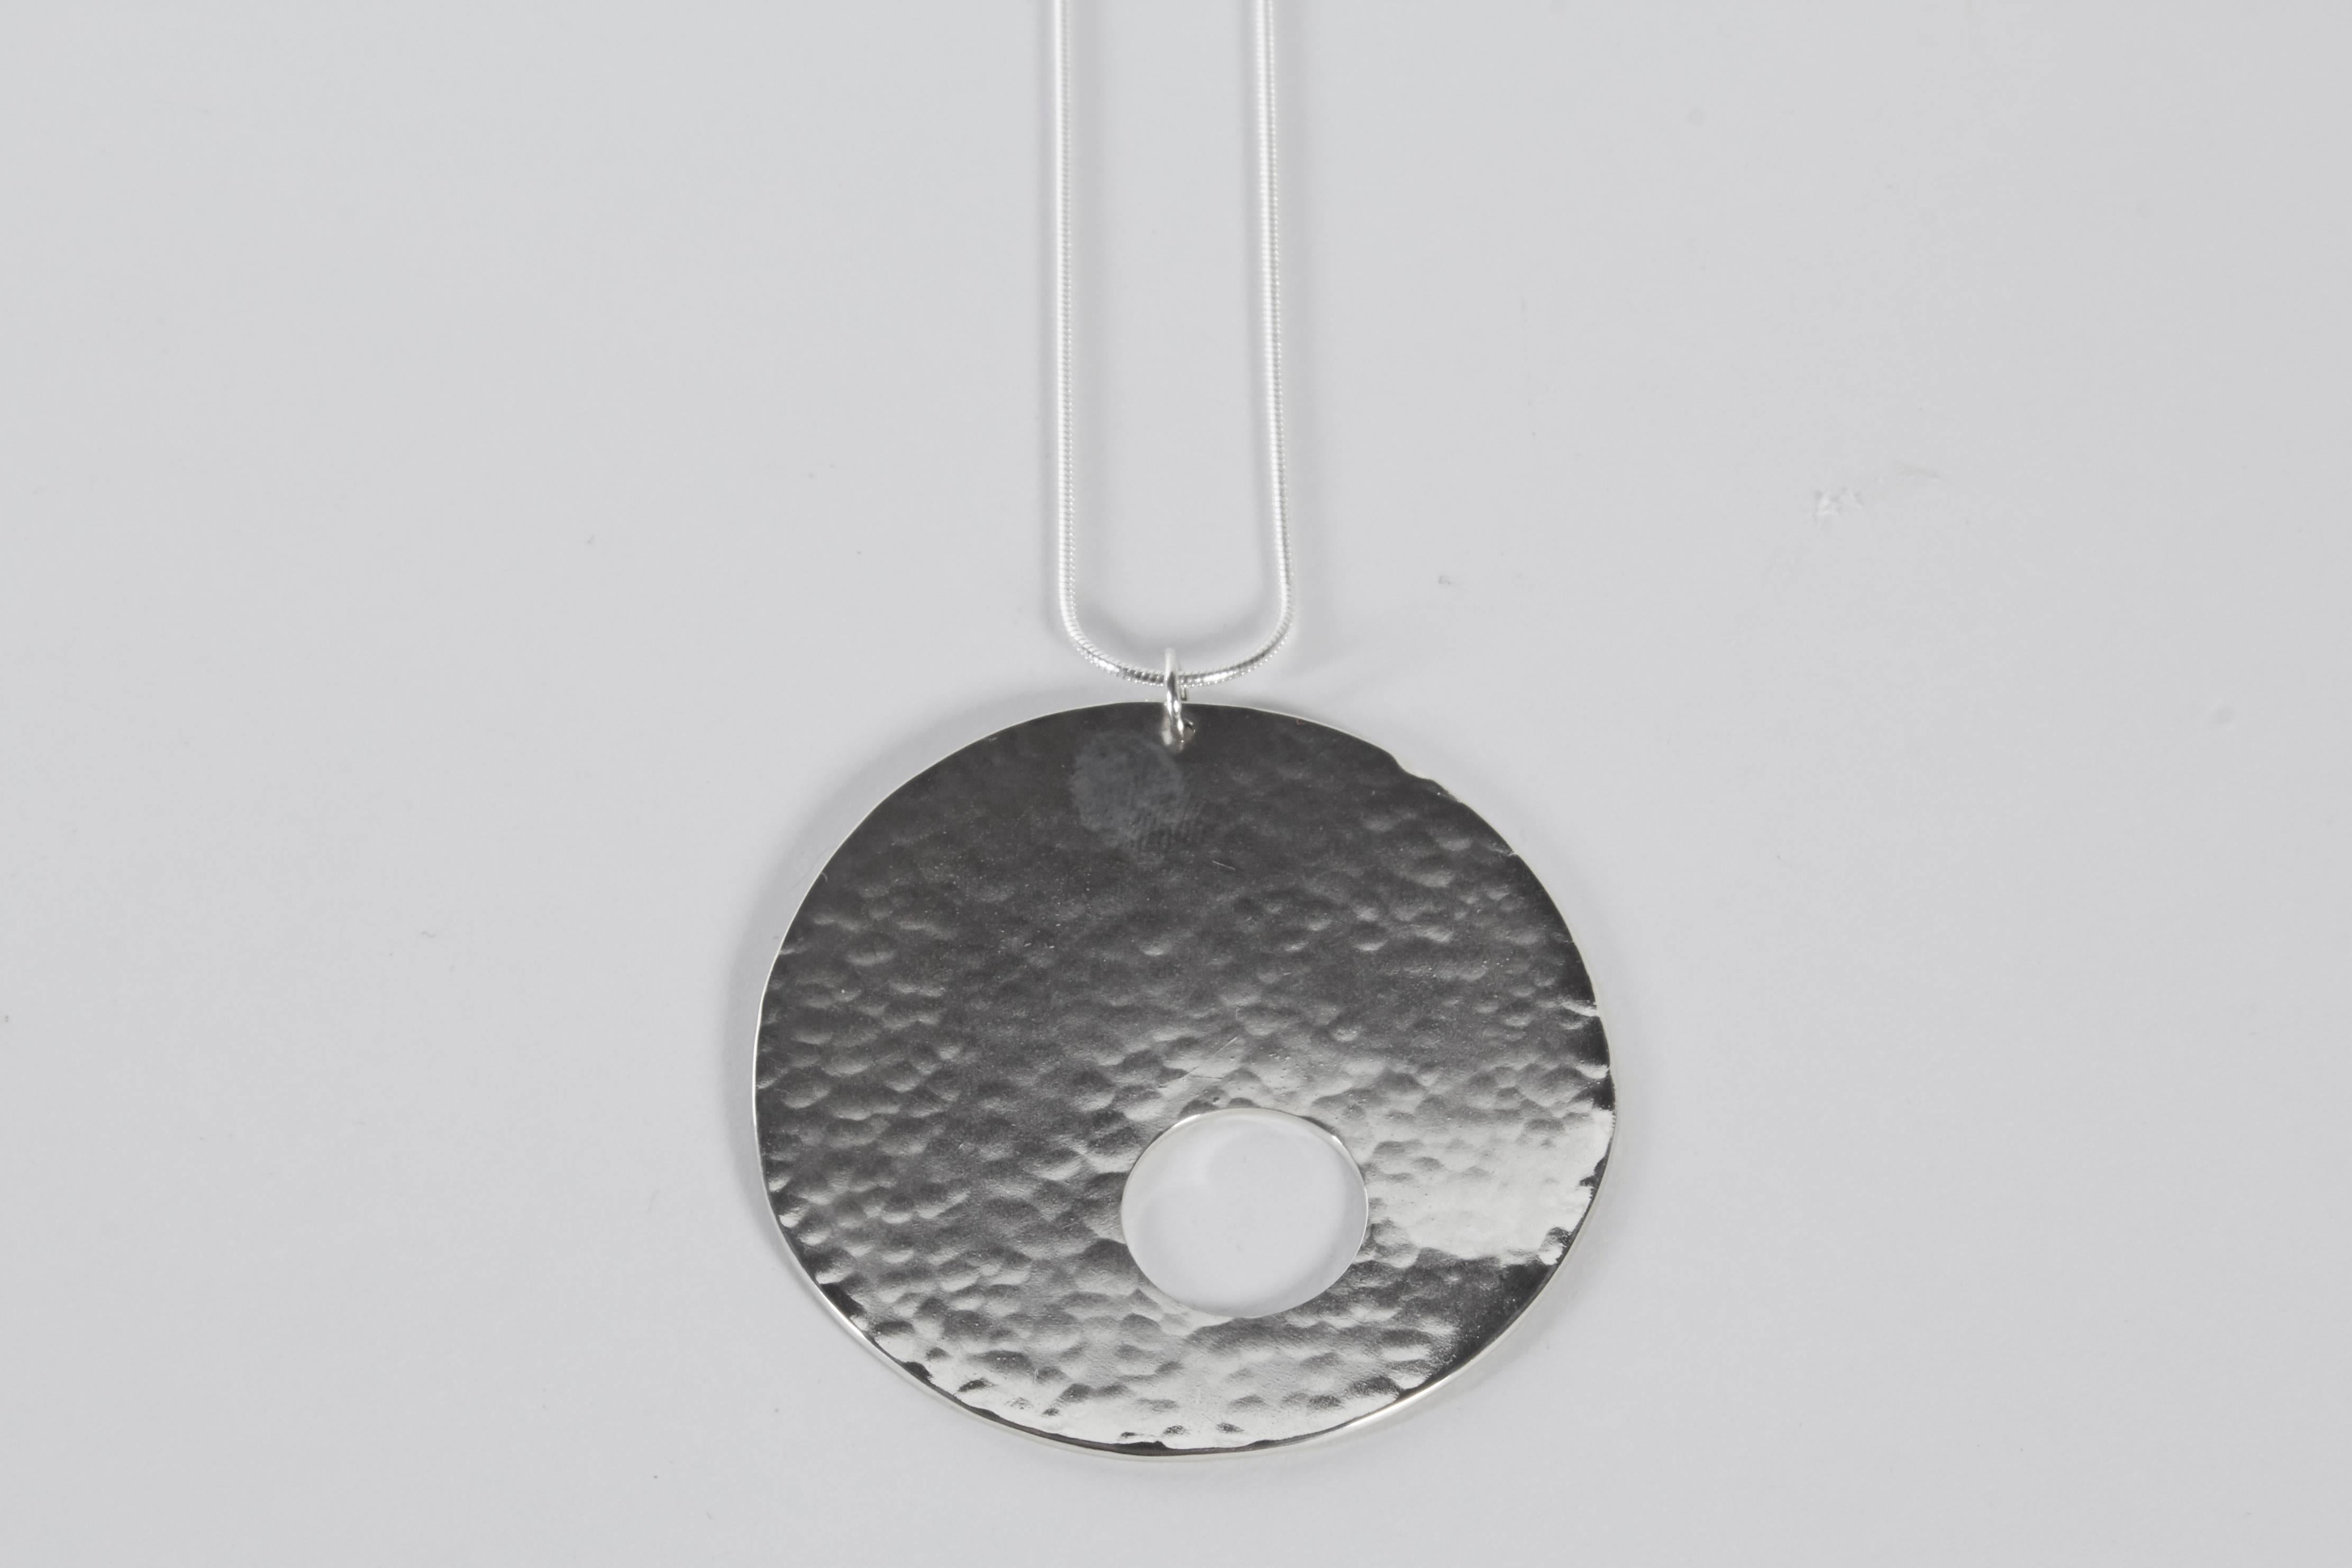 Hammered Limited Edition Sterling Silver Gong Style Pendant Designed by Harry Bertoia